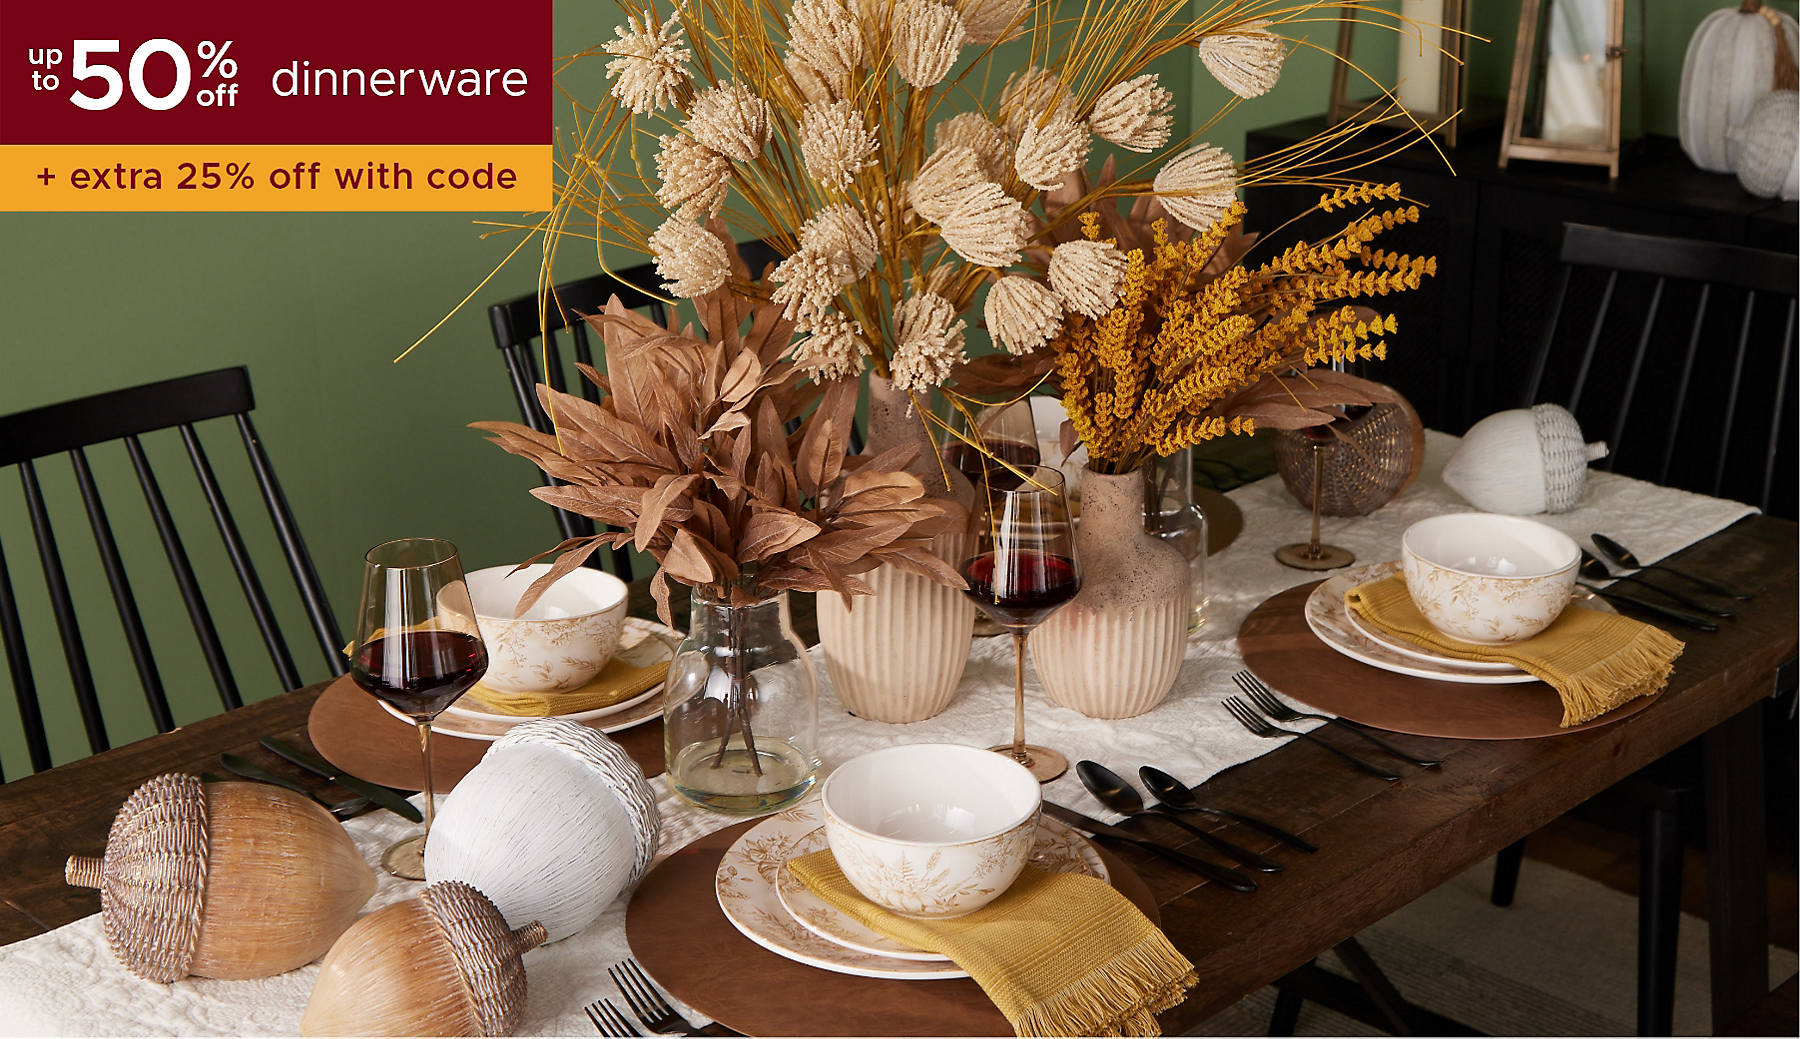 dinnerware up to 50% off + extra 25% off with code shop now